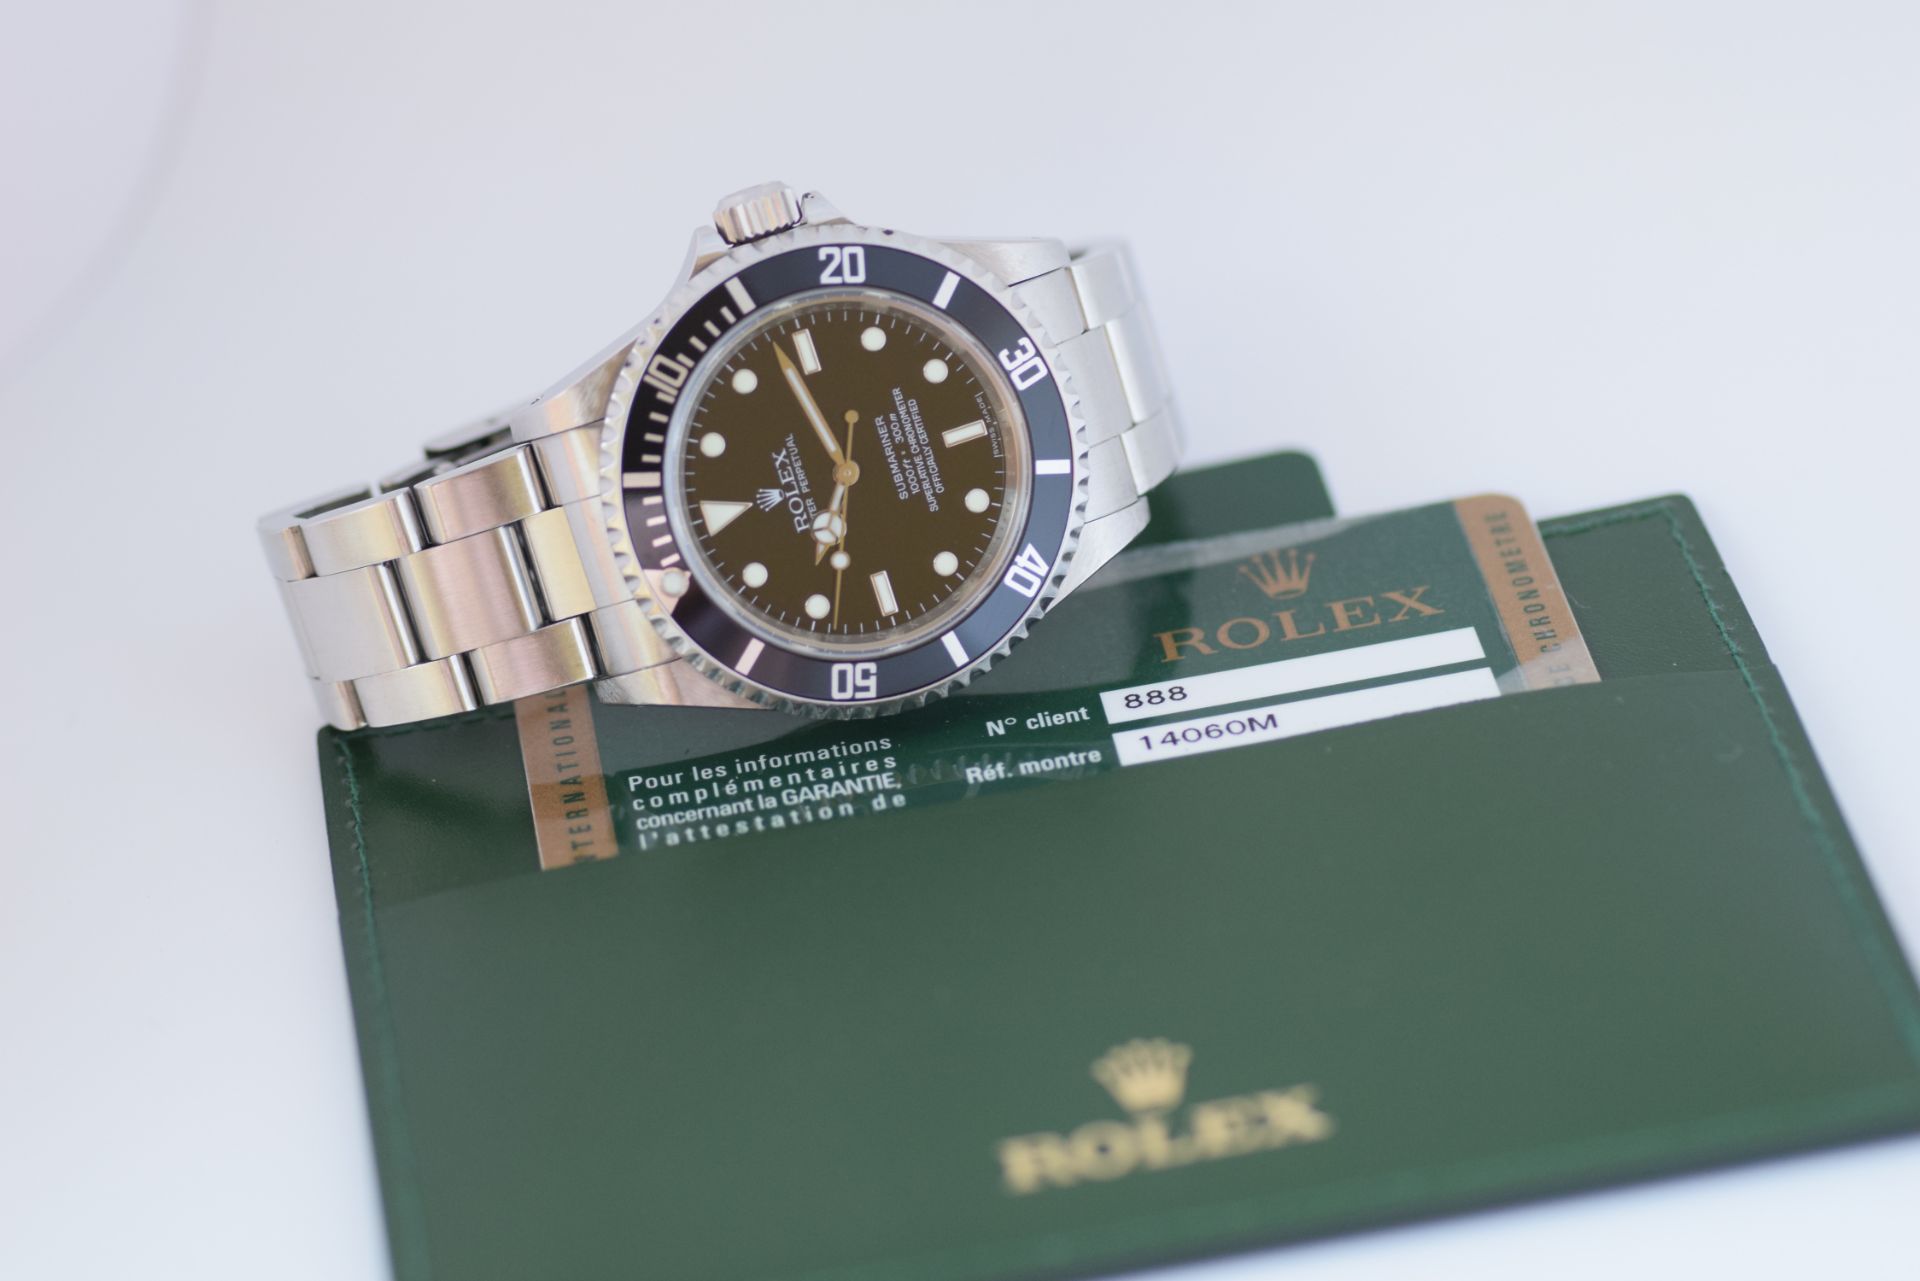 Rolex 14060M Non Date Submariner 2009 Engraved Rehaut 2009 Wty Card - Image 6 of 10